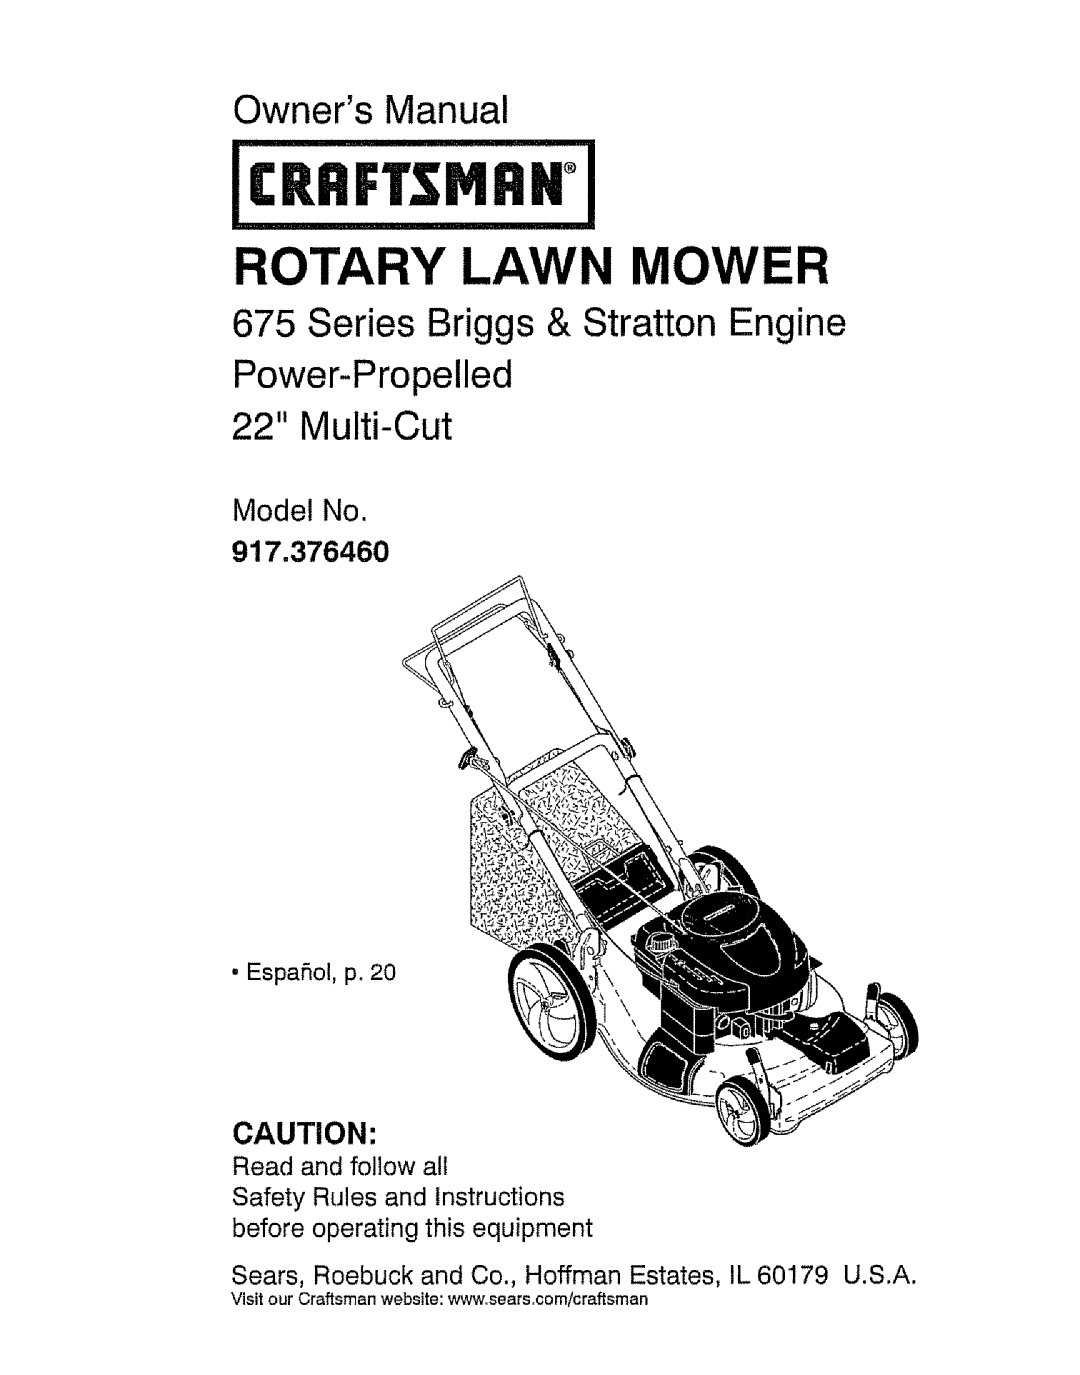 Craftsman 917.37646 owner manual Owners Manual, Series Briggs & Stratton Engine, Model No, Craftsman, Rotary Lawn Mower 